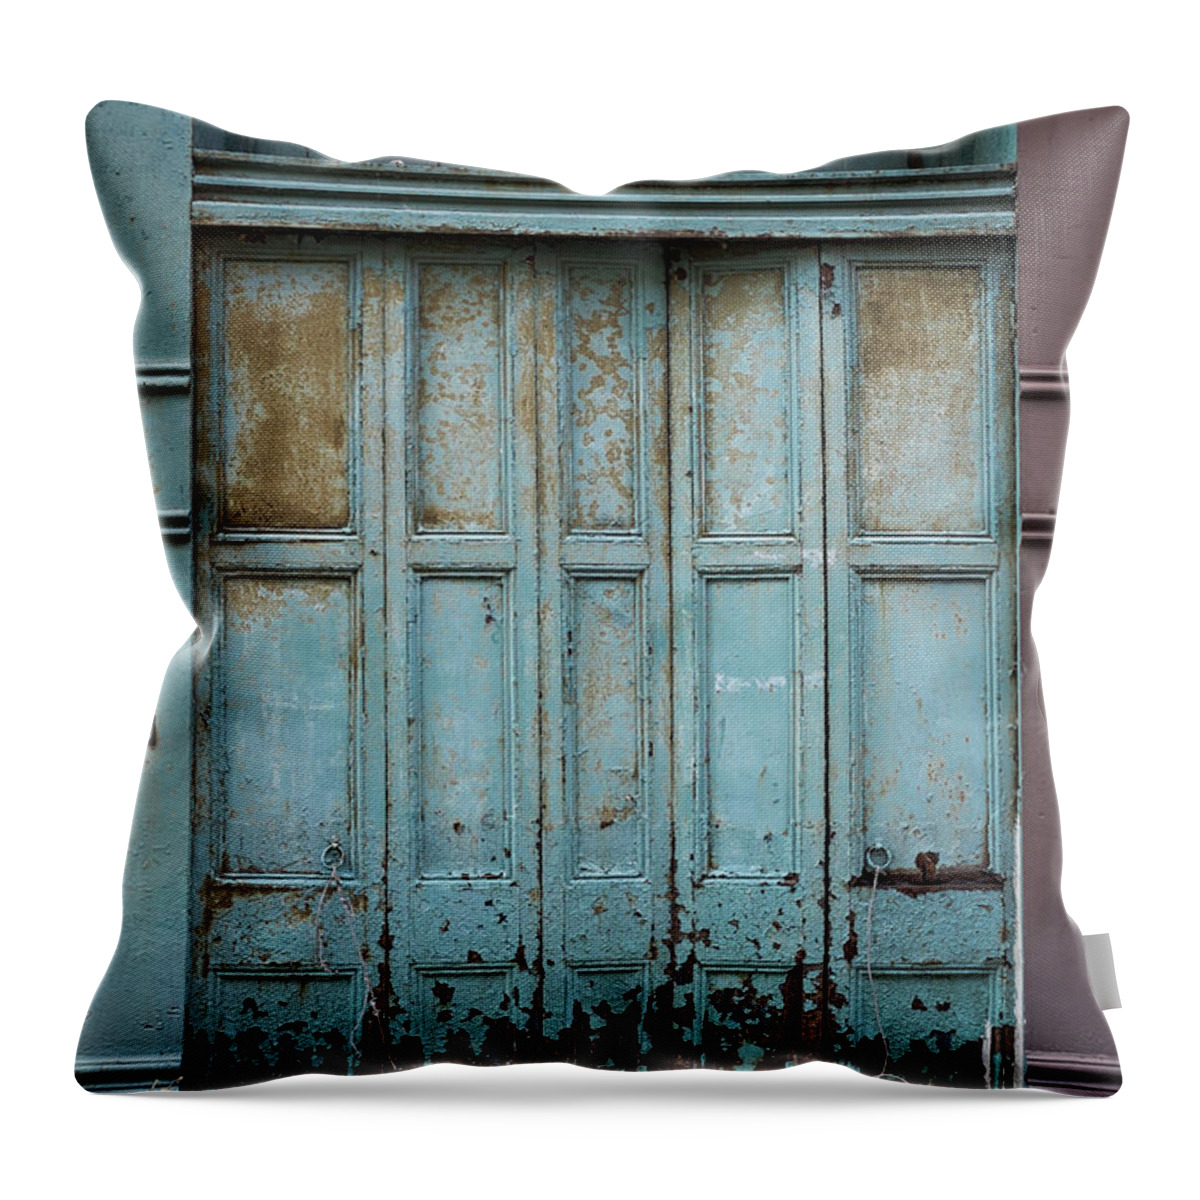 Shutter Throw Pillow featuring the photograph Old Distressed Shutters by Spiderstock